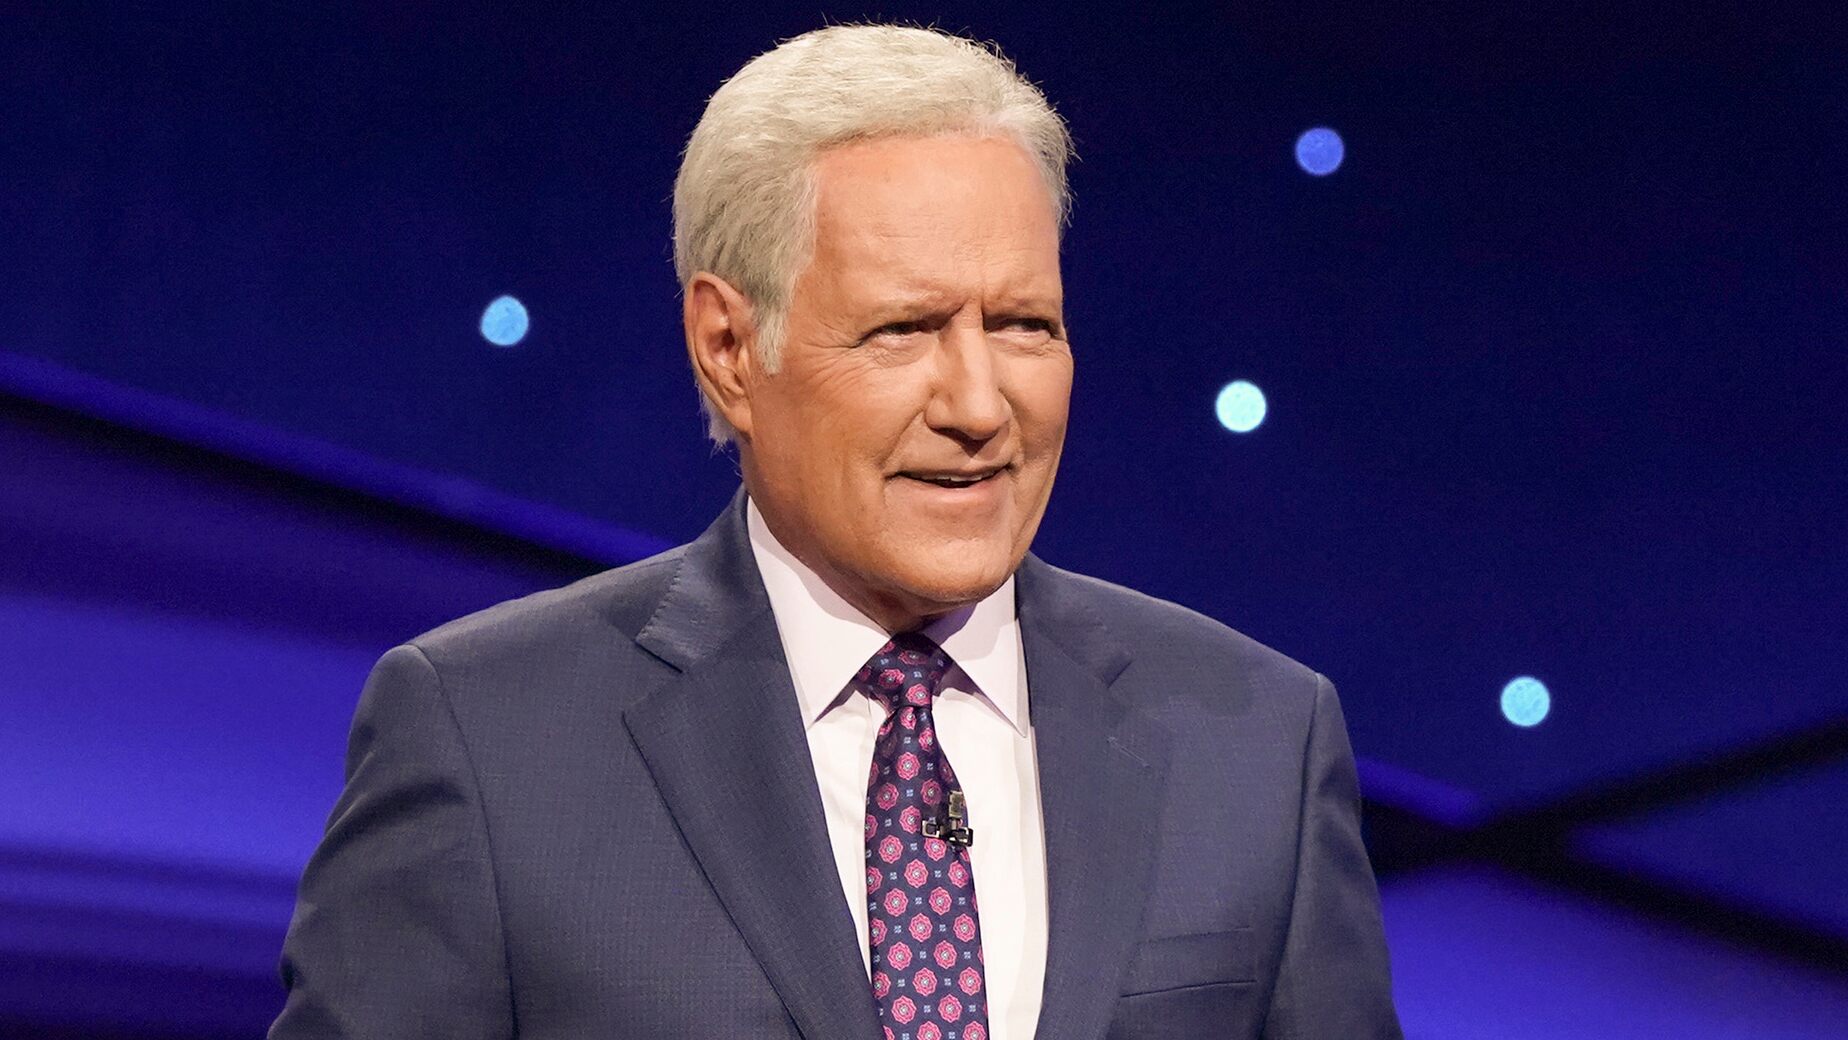 Daughter of Alex Trebek pays tribute to late Jeopardy host after last episode: 'I was cool'